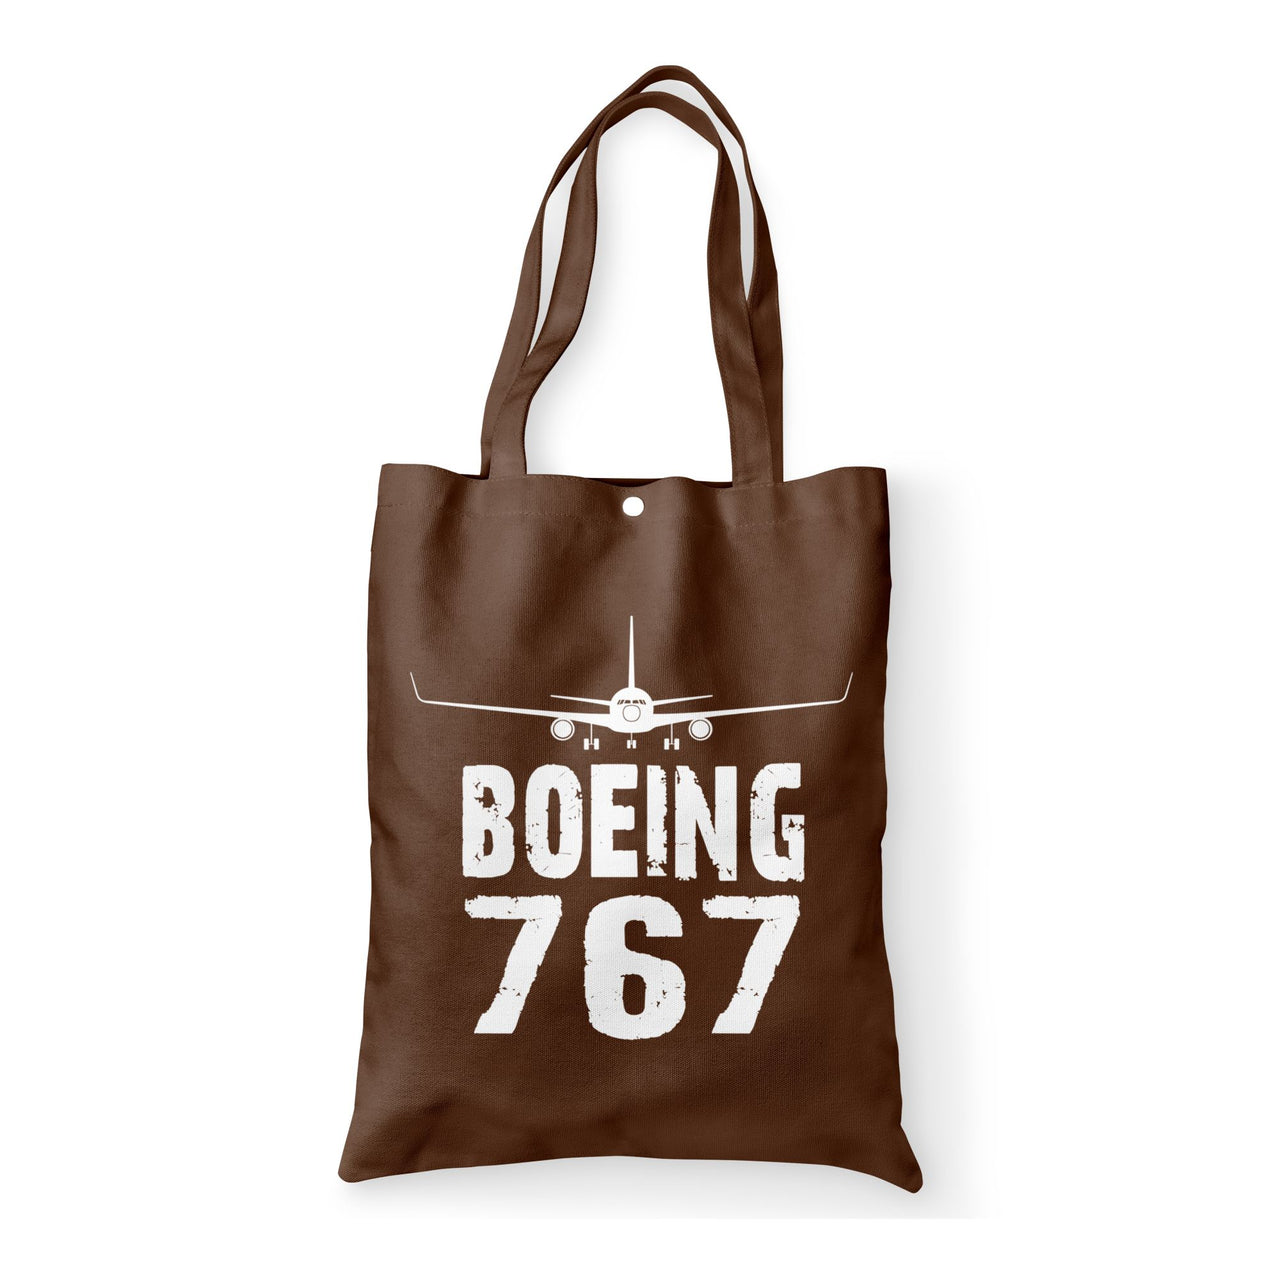 Boeing 767 & Plane Designed Tote Bags